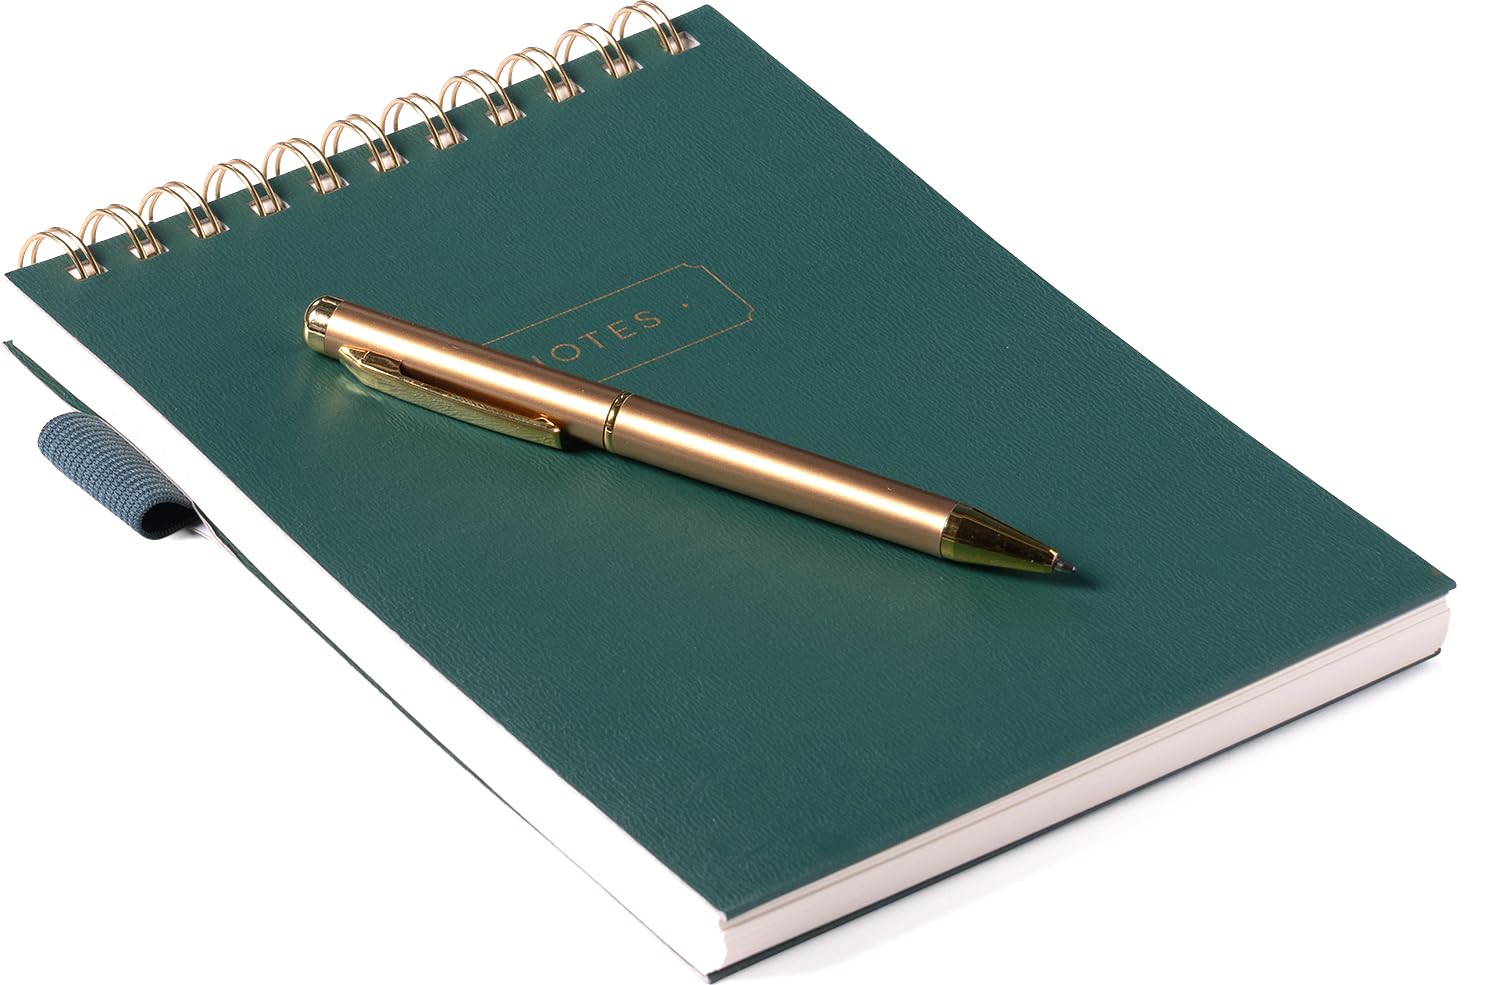 Flexi-Cover Steno Pad with Pen Included